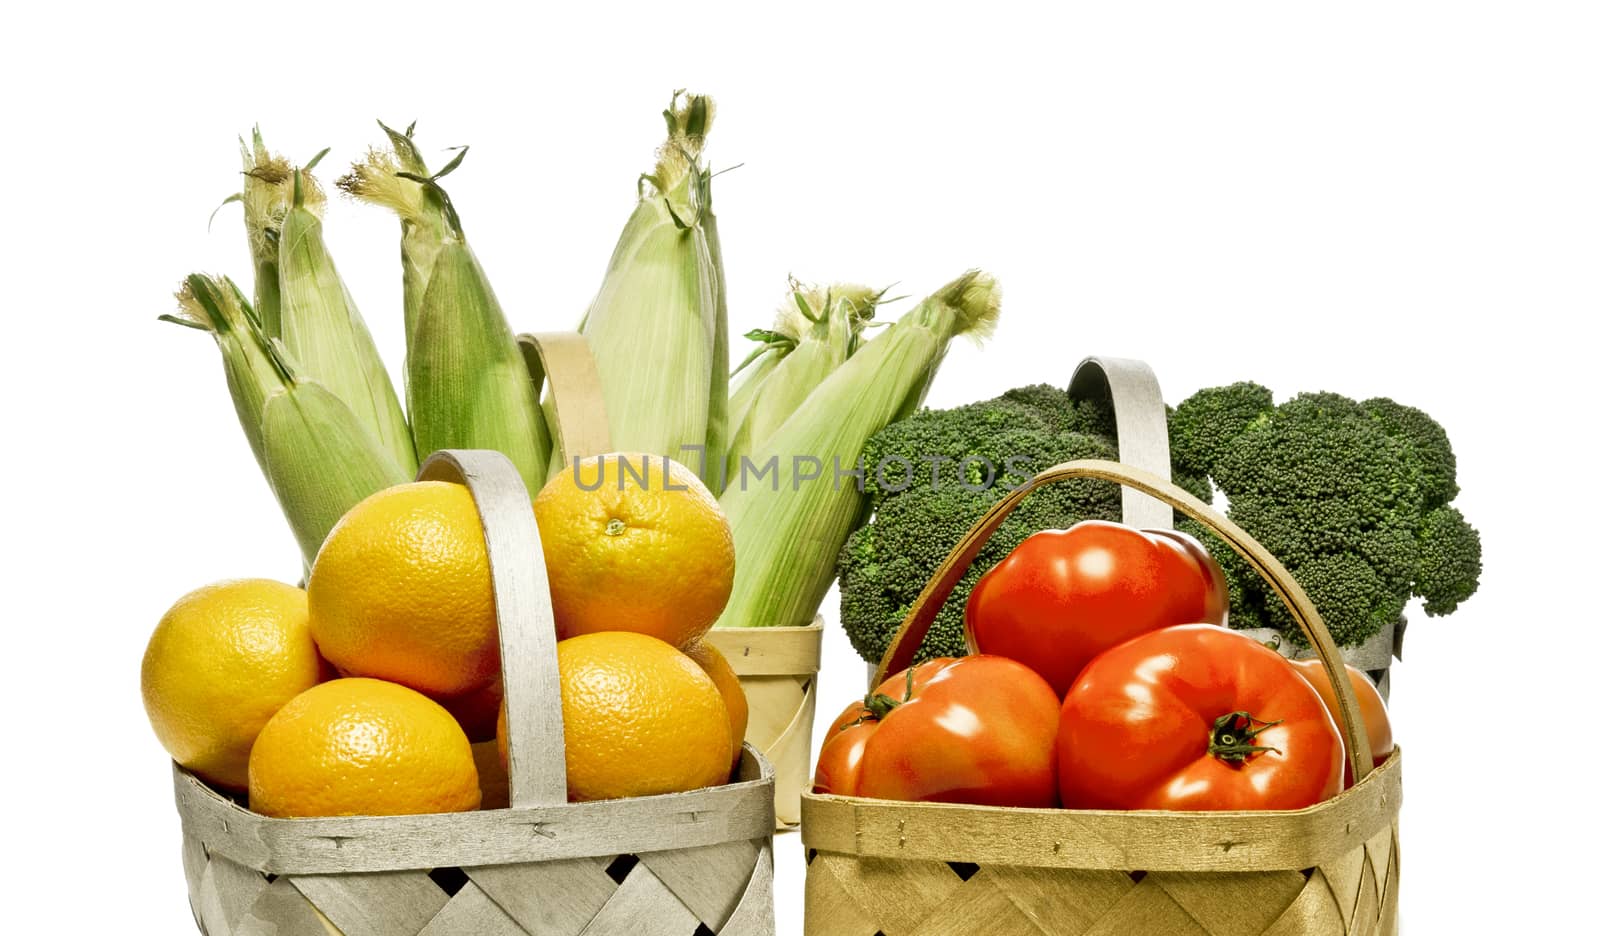 Healthy Fruits And Vegetables Isolated by stockbuster1